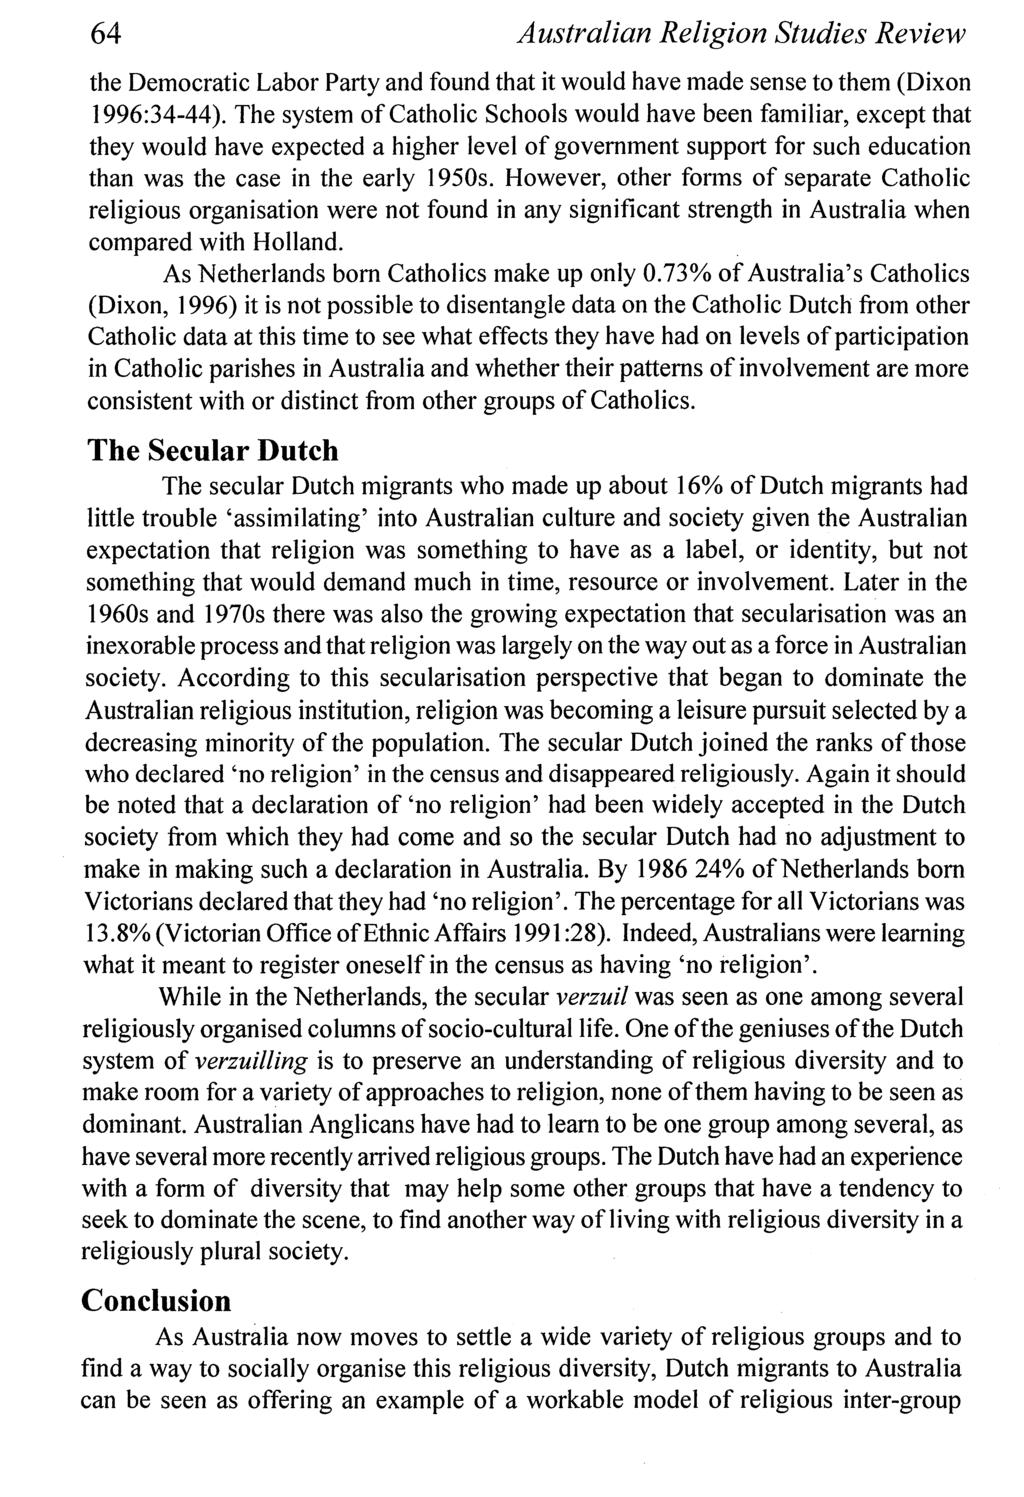 64 Australian Religion Studies Review the Democratic Labor Party and found that it would have made sense to them (Dixon 1996:34-44 ).